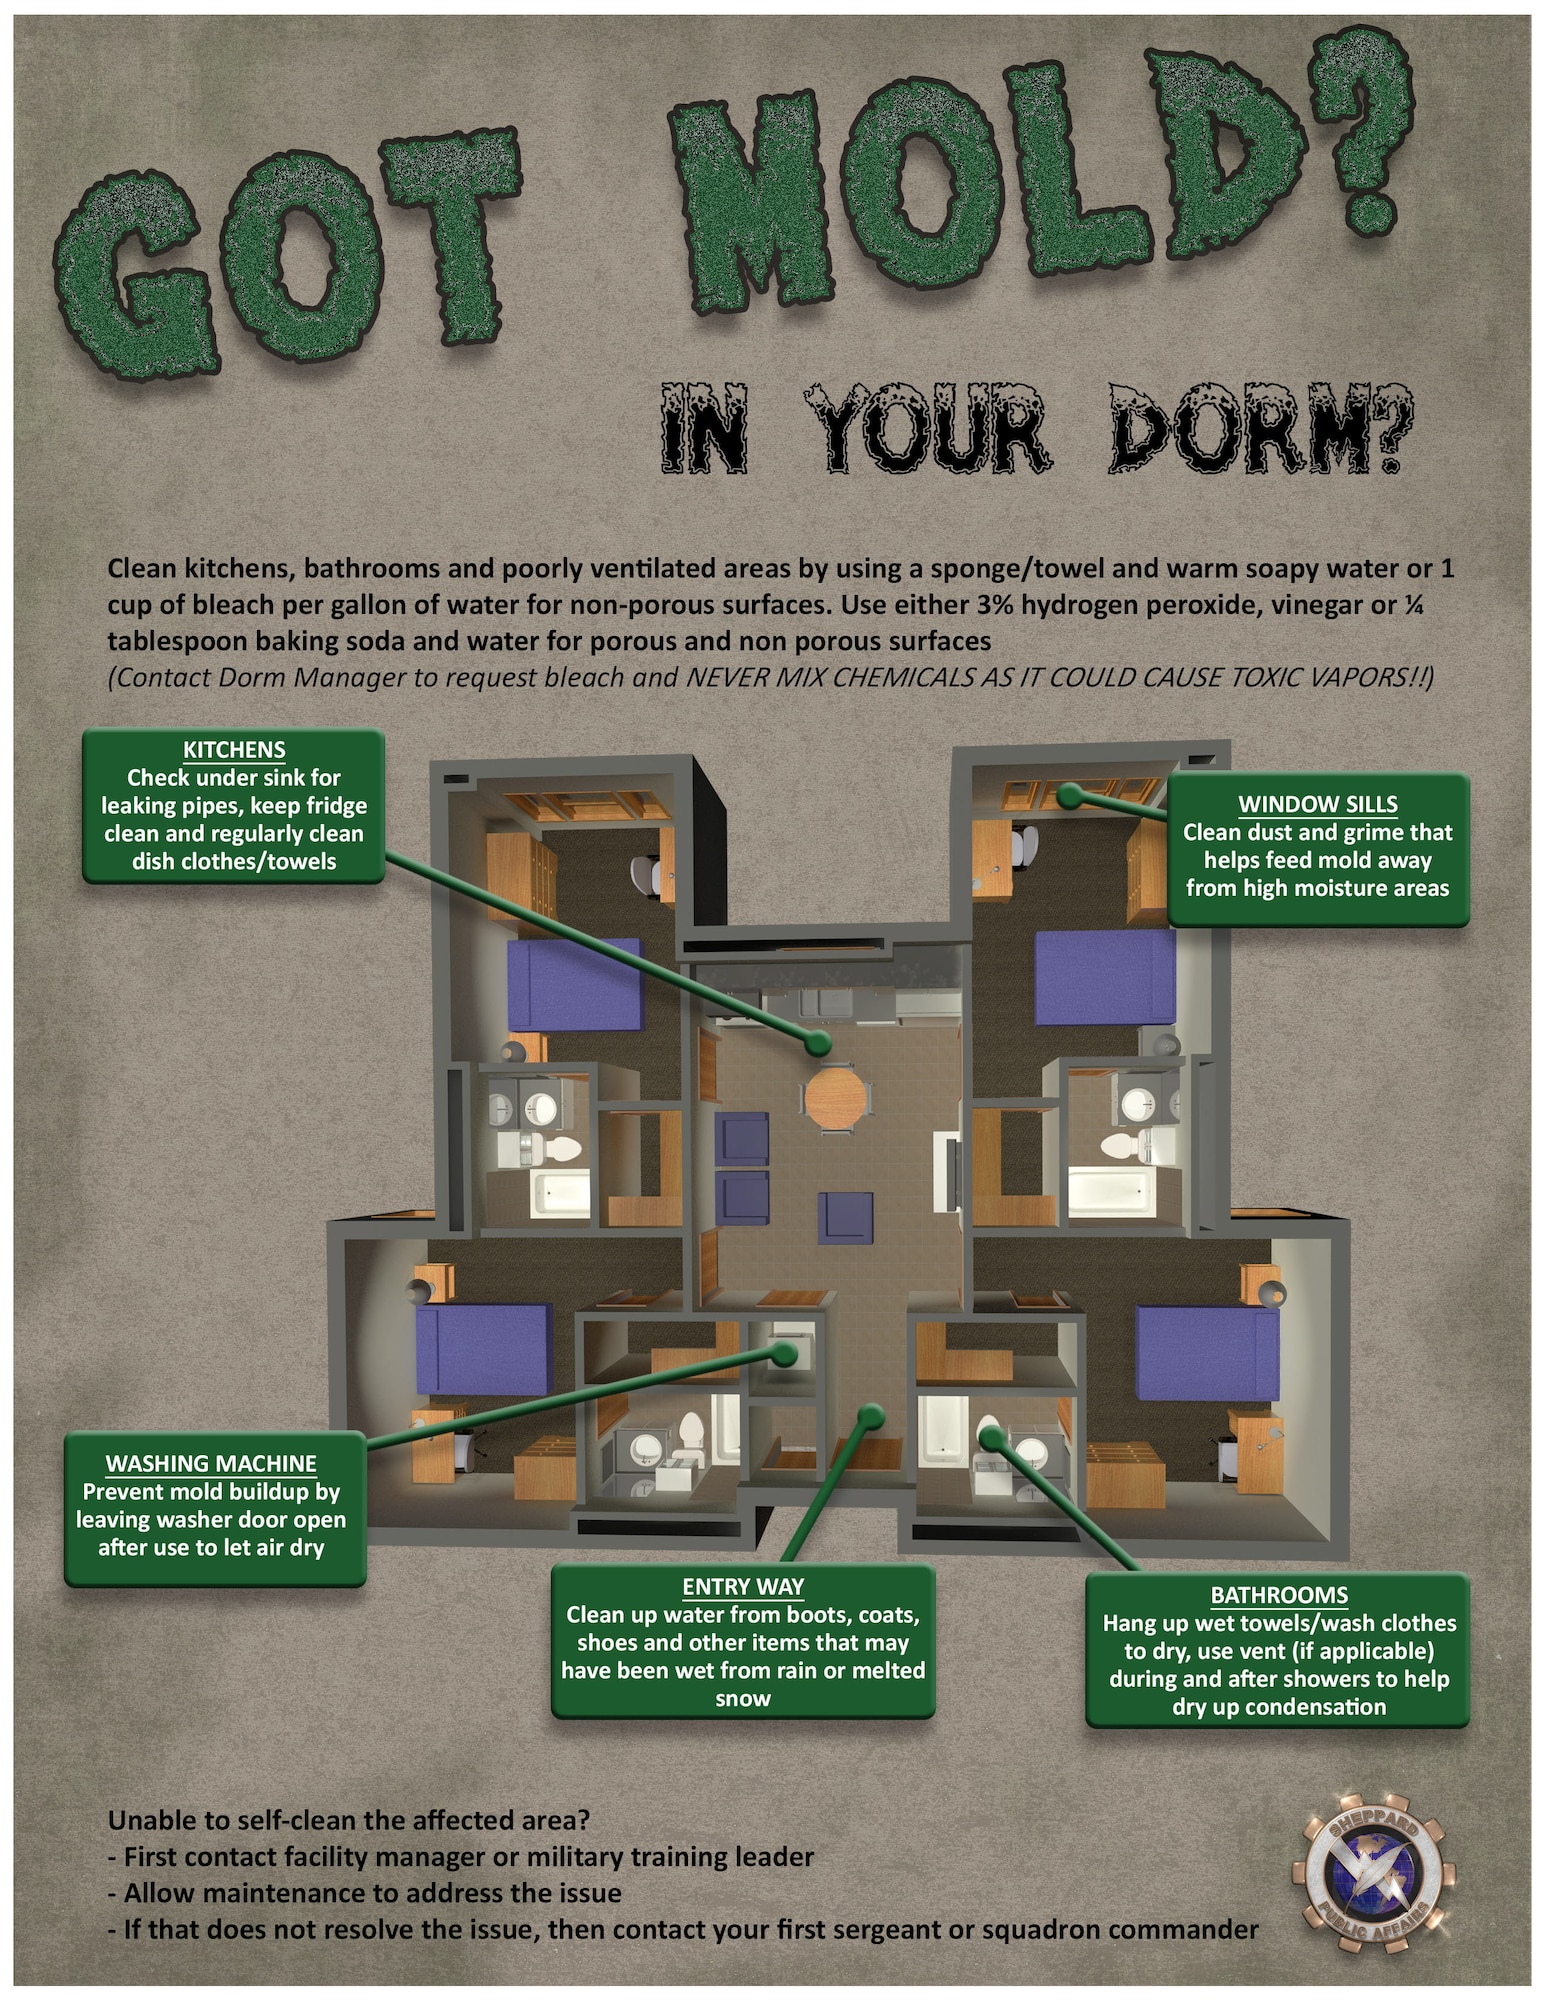 This infographic touches on preventive measures and in-home treatments for mold.